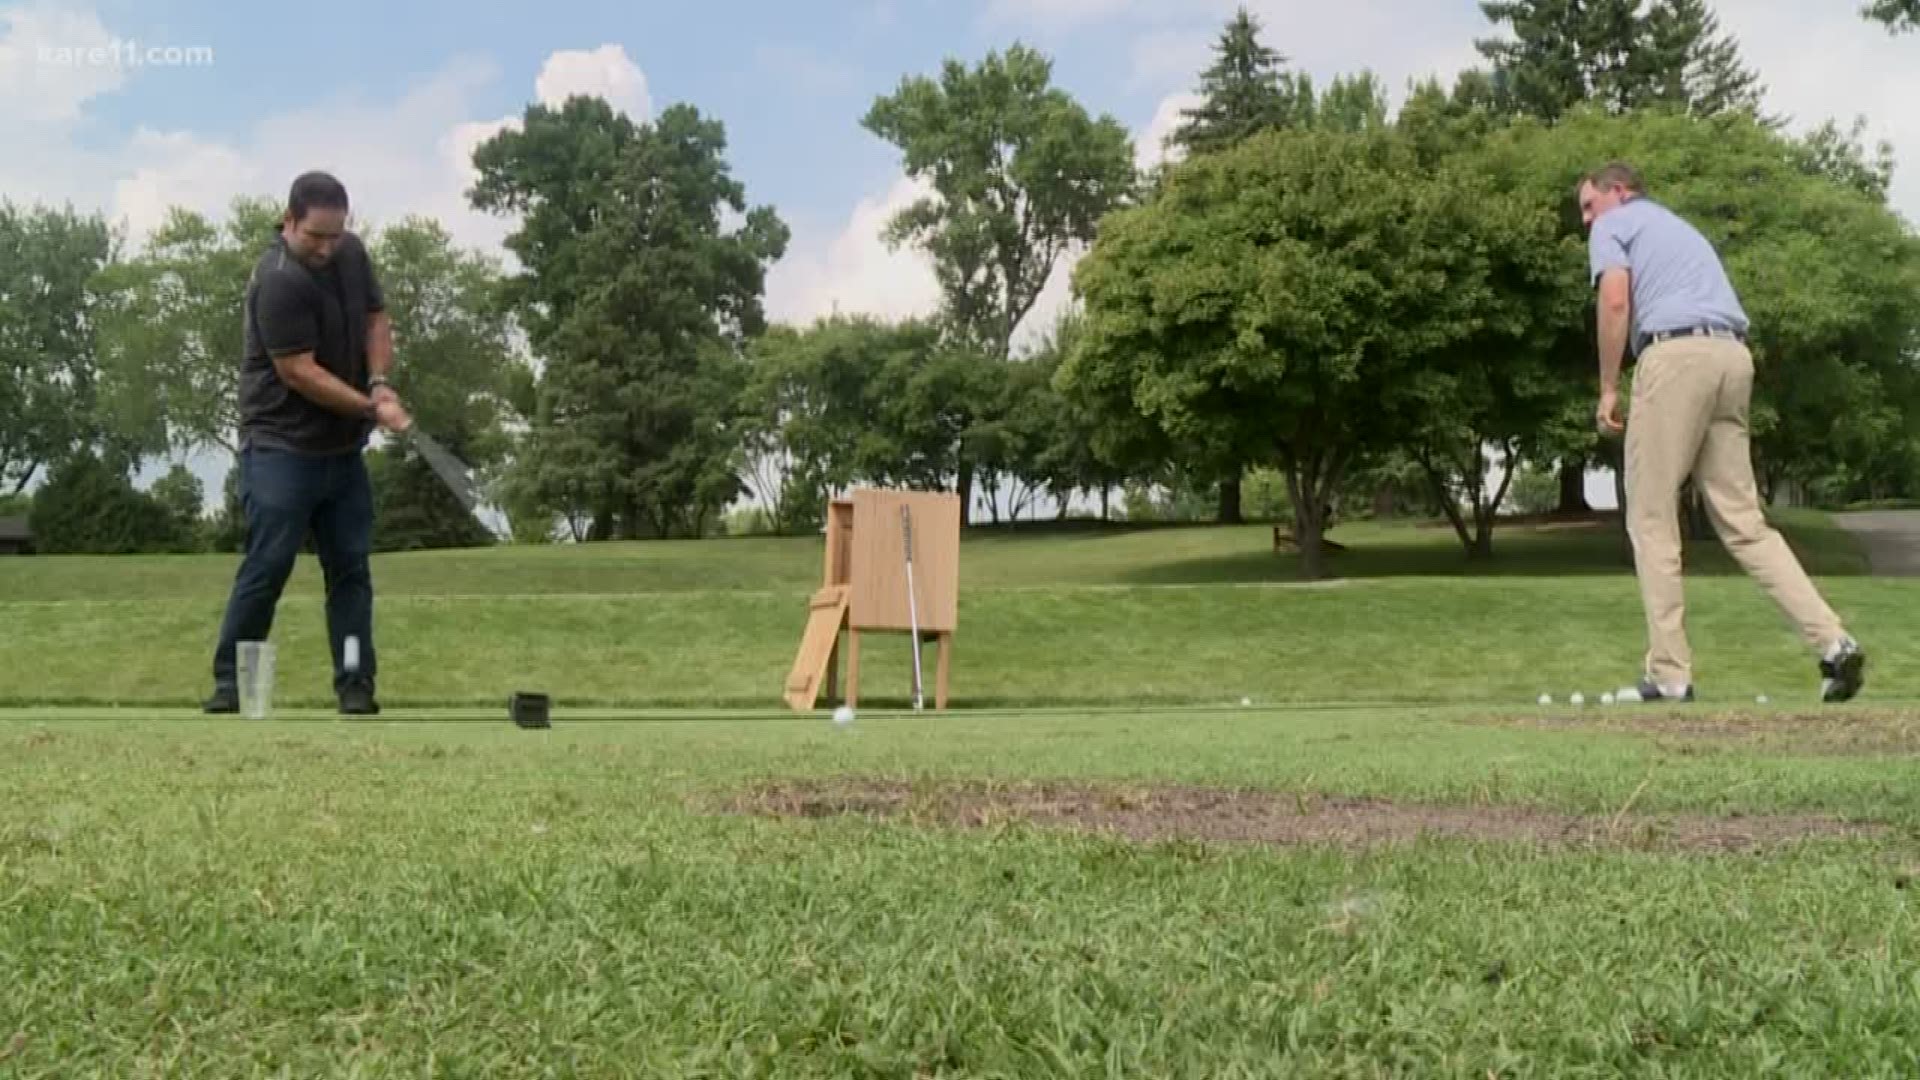 "How Hard Can It Be?" to do a trick golf shot? The KARE 11 Sports Department tried their luck out on the golf course. https://kare11.tv/2n2Phqn